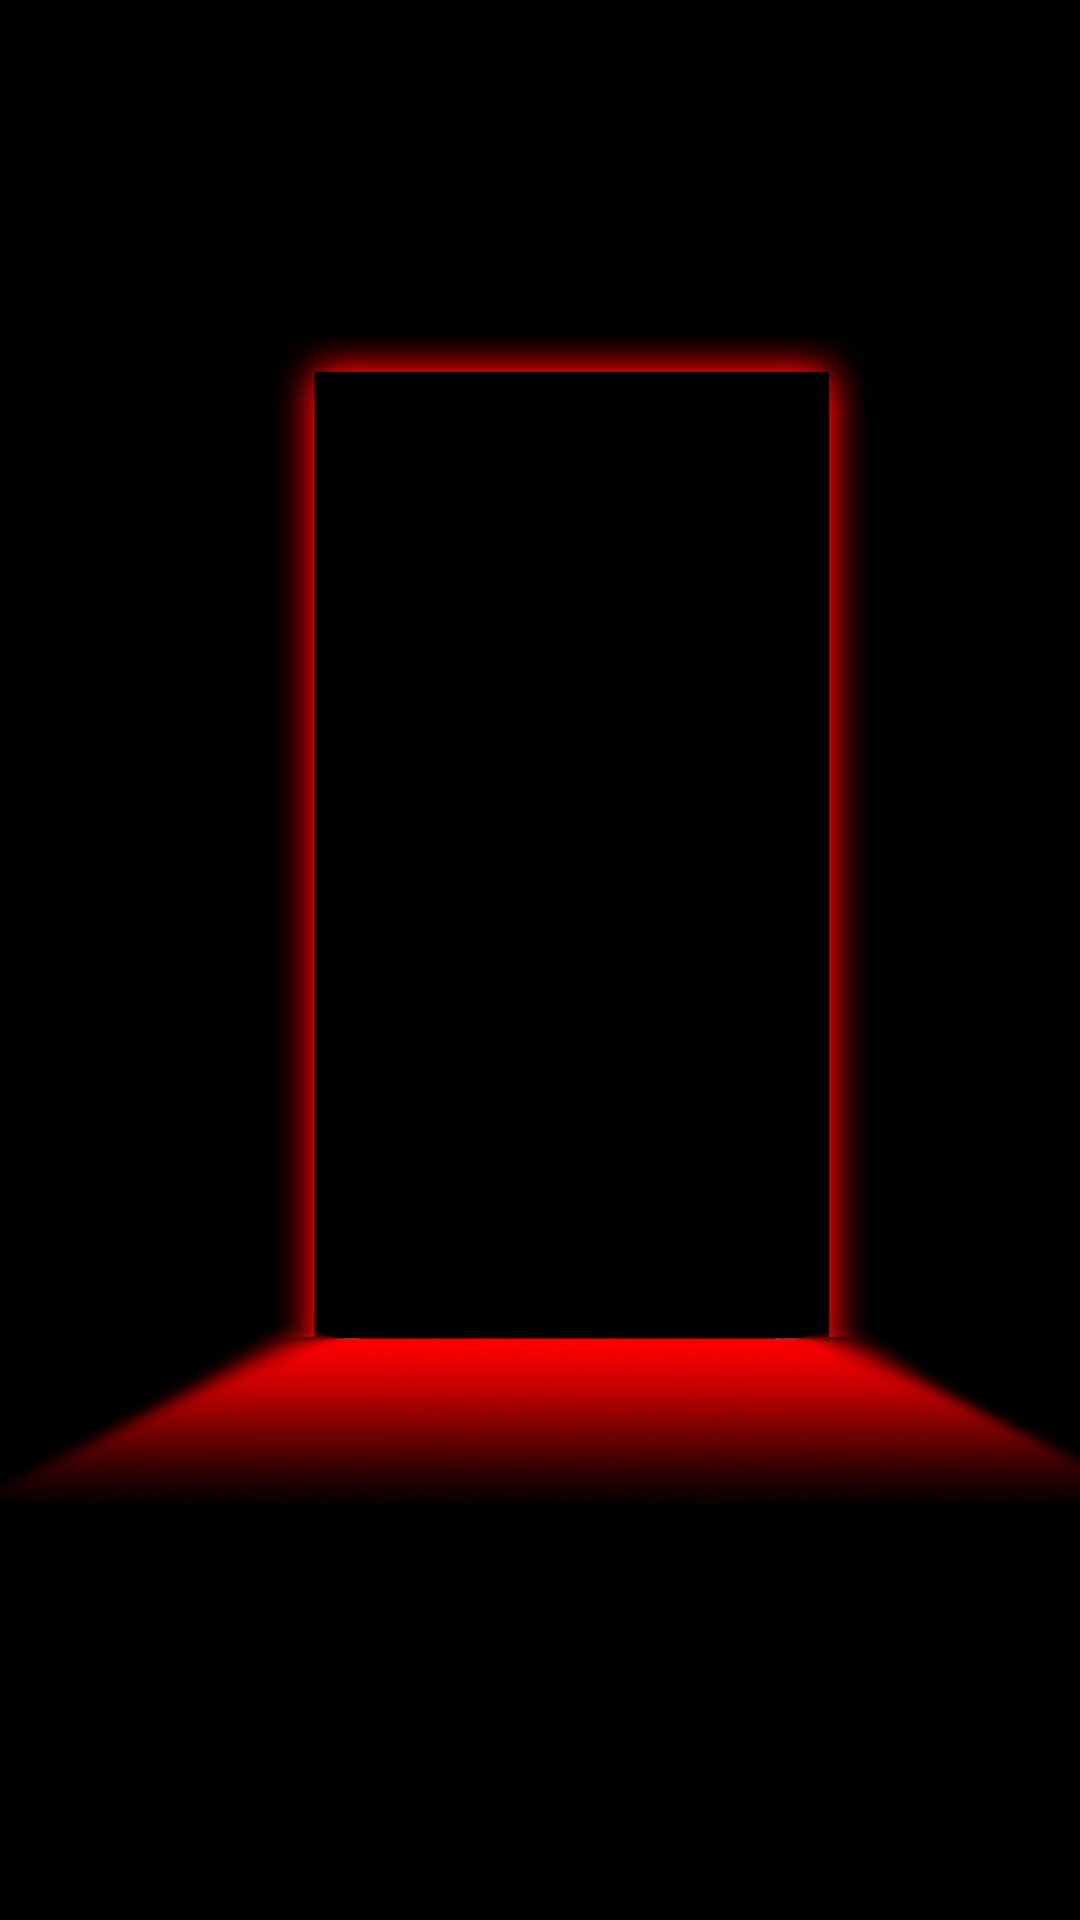 Black and Red Phone 8 Wallpaper with high-resolution 1080x1920 pixel. Download all Mobile Wallpapers and Use them as wallpapers for your iPhone, Tablet, iPad, Android and other mobile devices